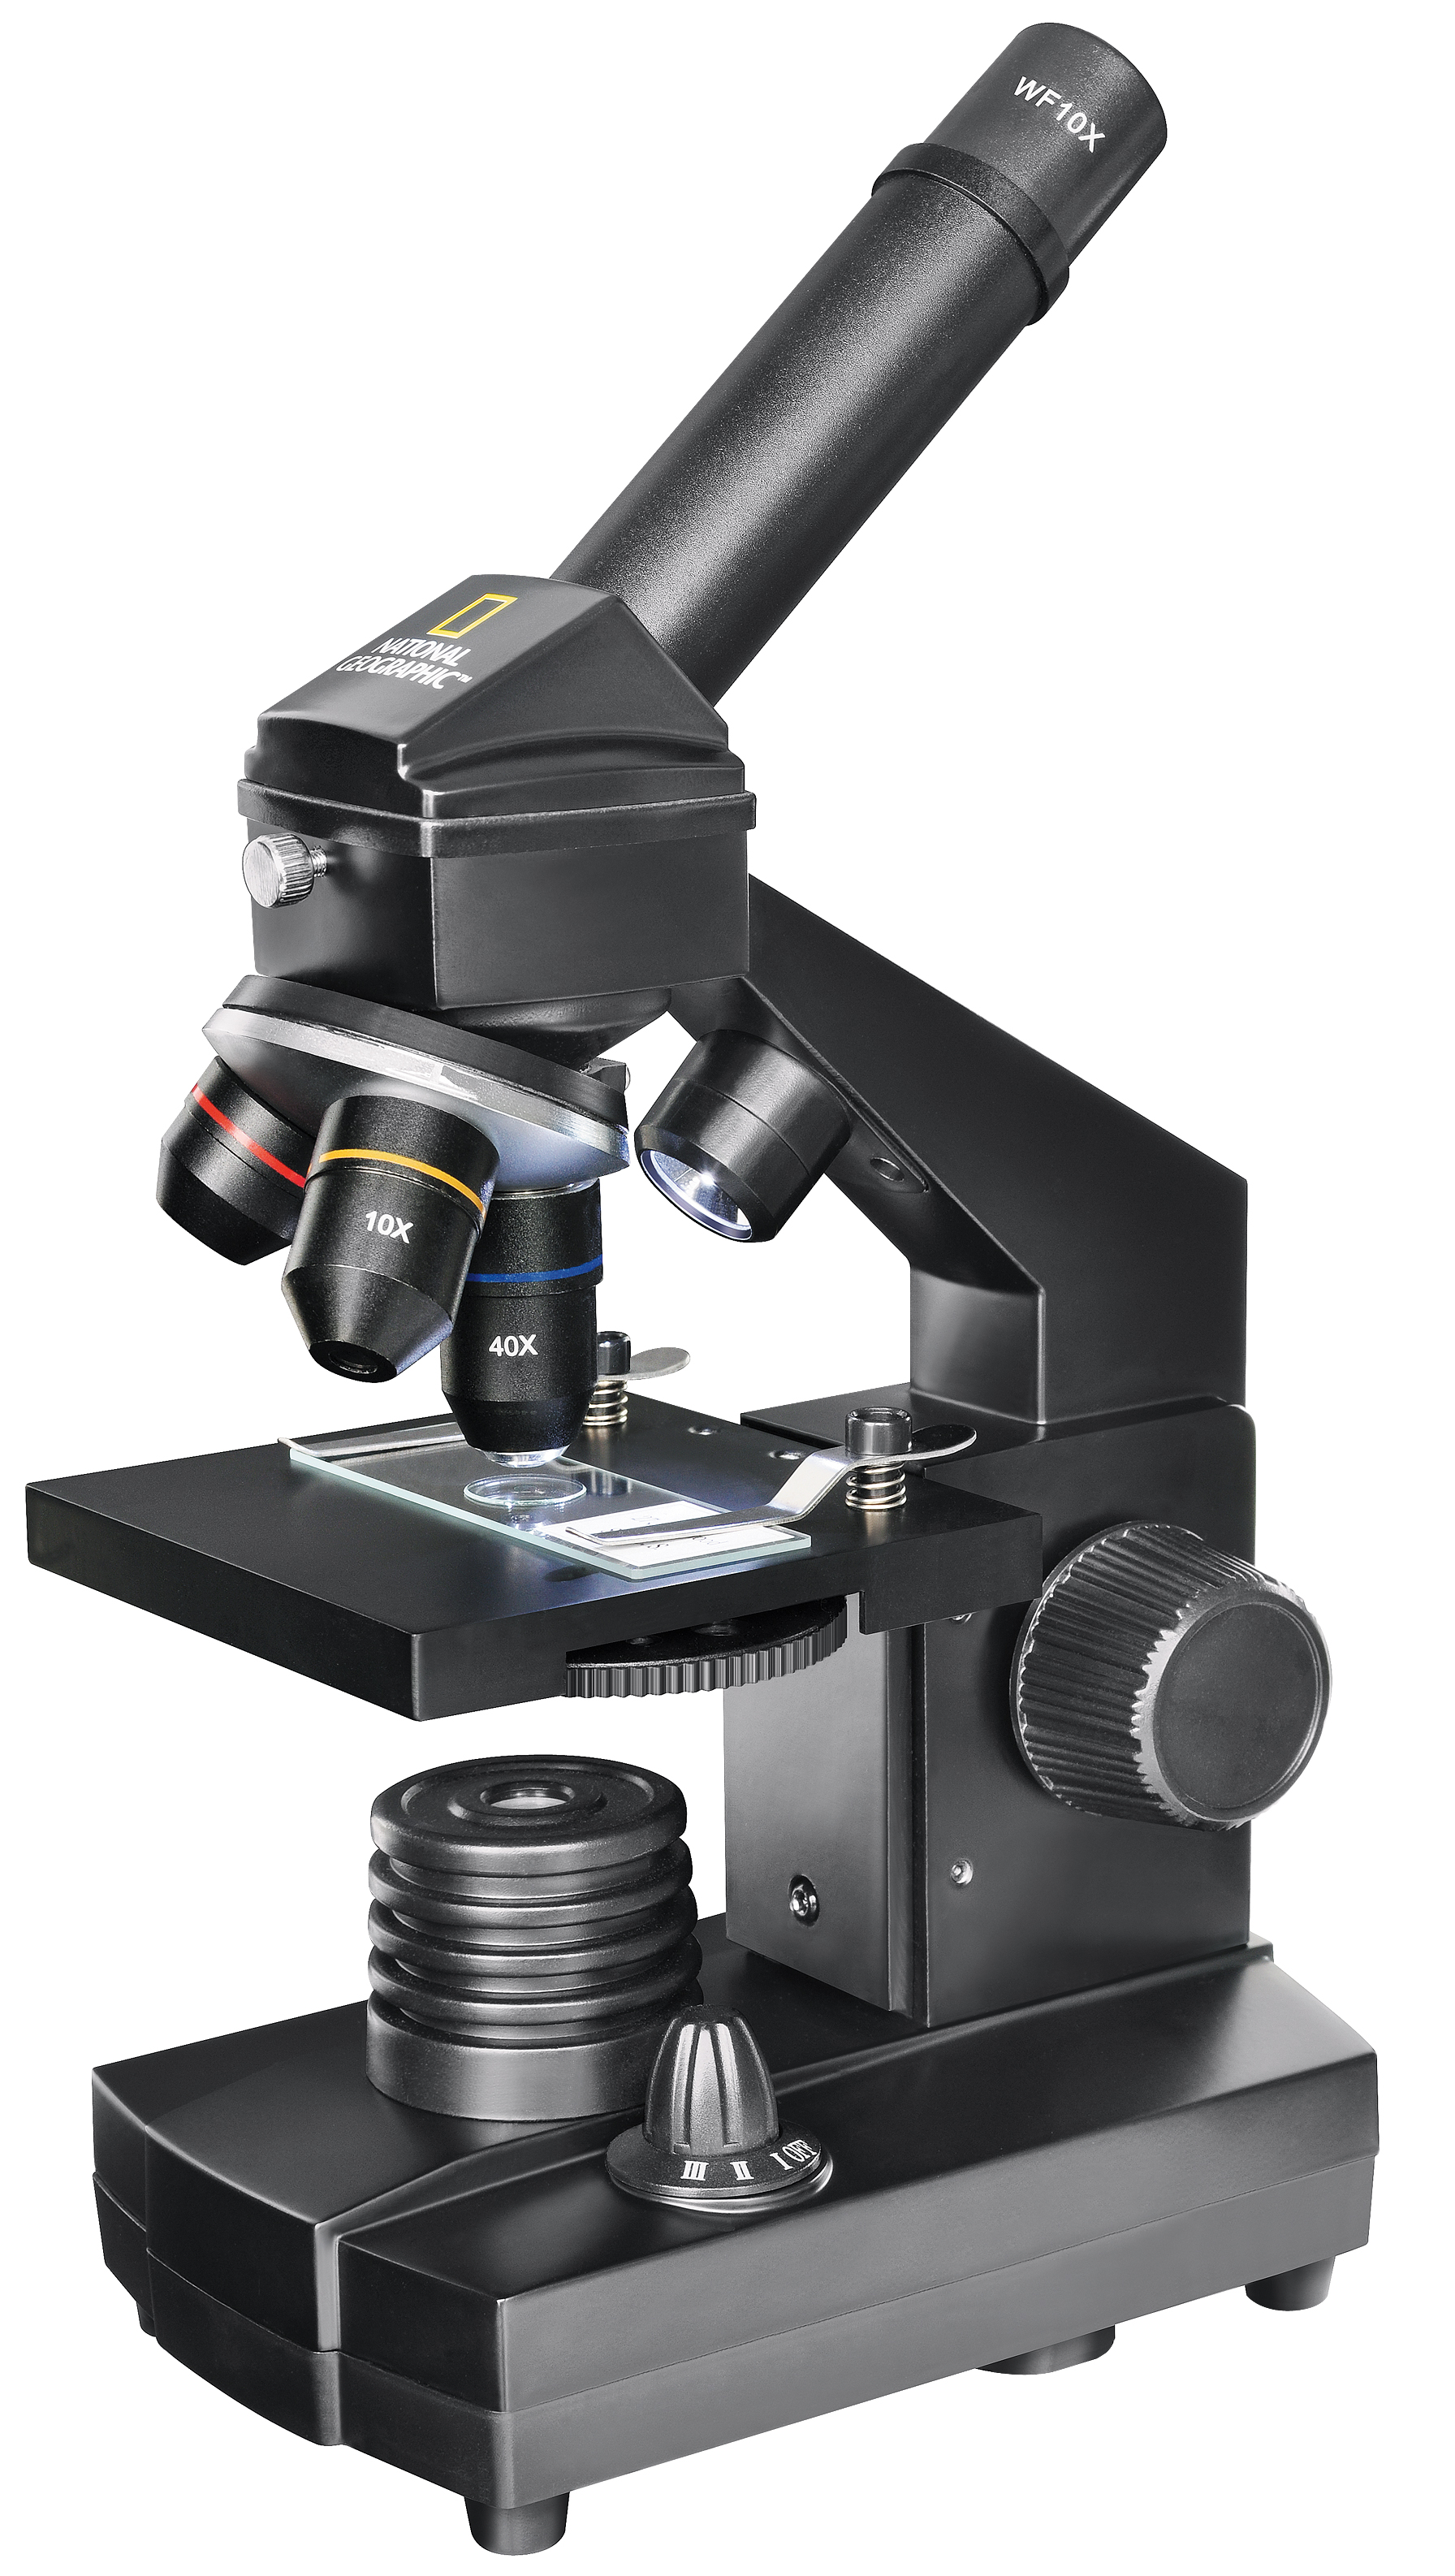 NATIONAL GEOGRAPHIC 40x-1280x Microscope with Smartphone holder ...